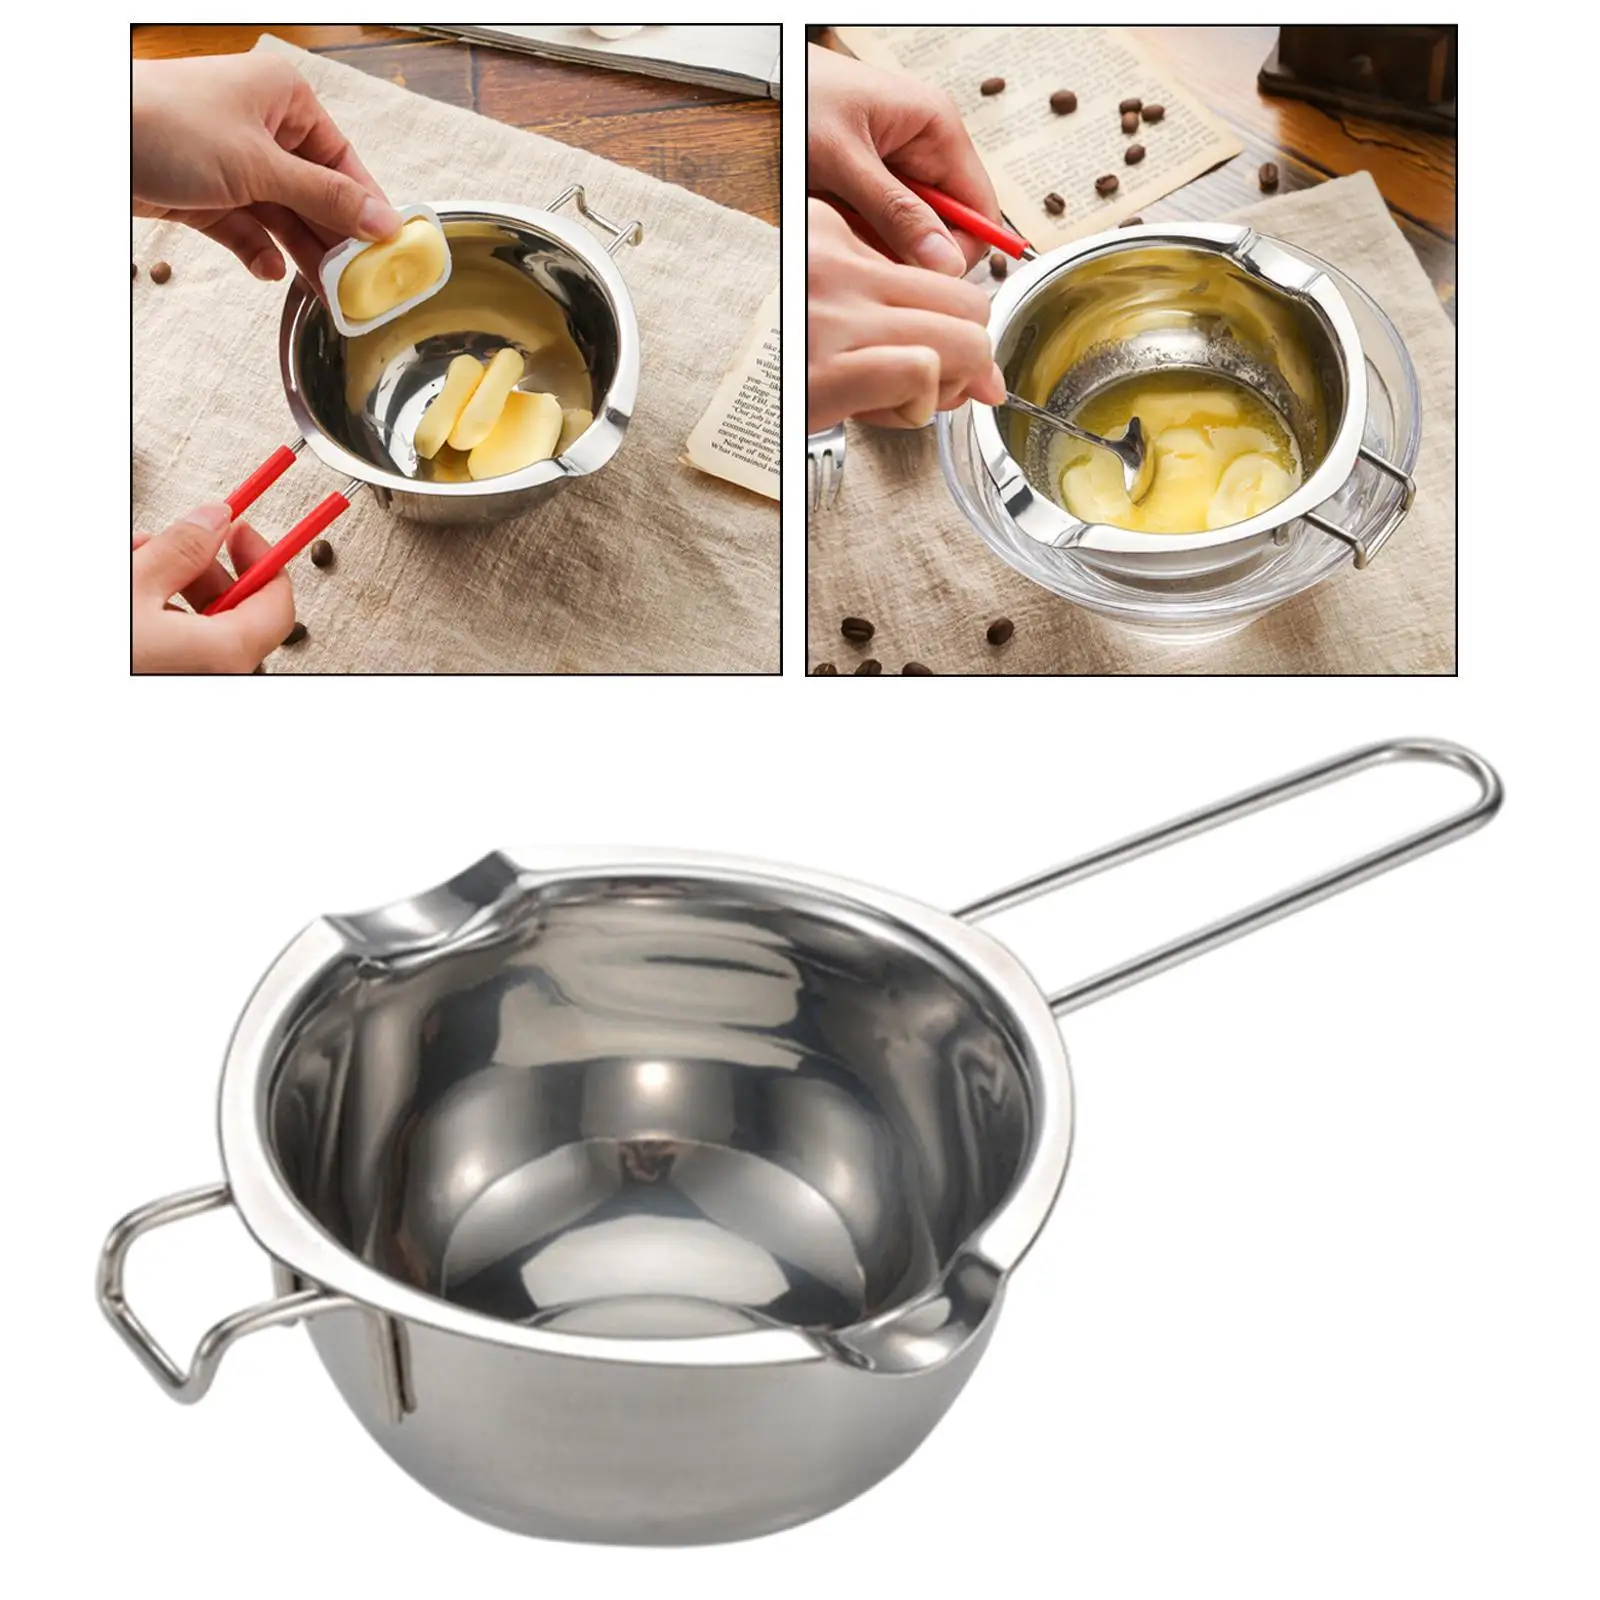 600ml Double Boiler Pot Melting Pot for Melting Chocolate Easy to Clean Widely